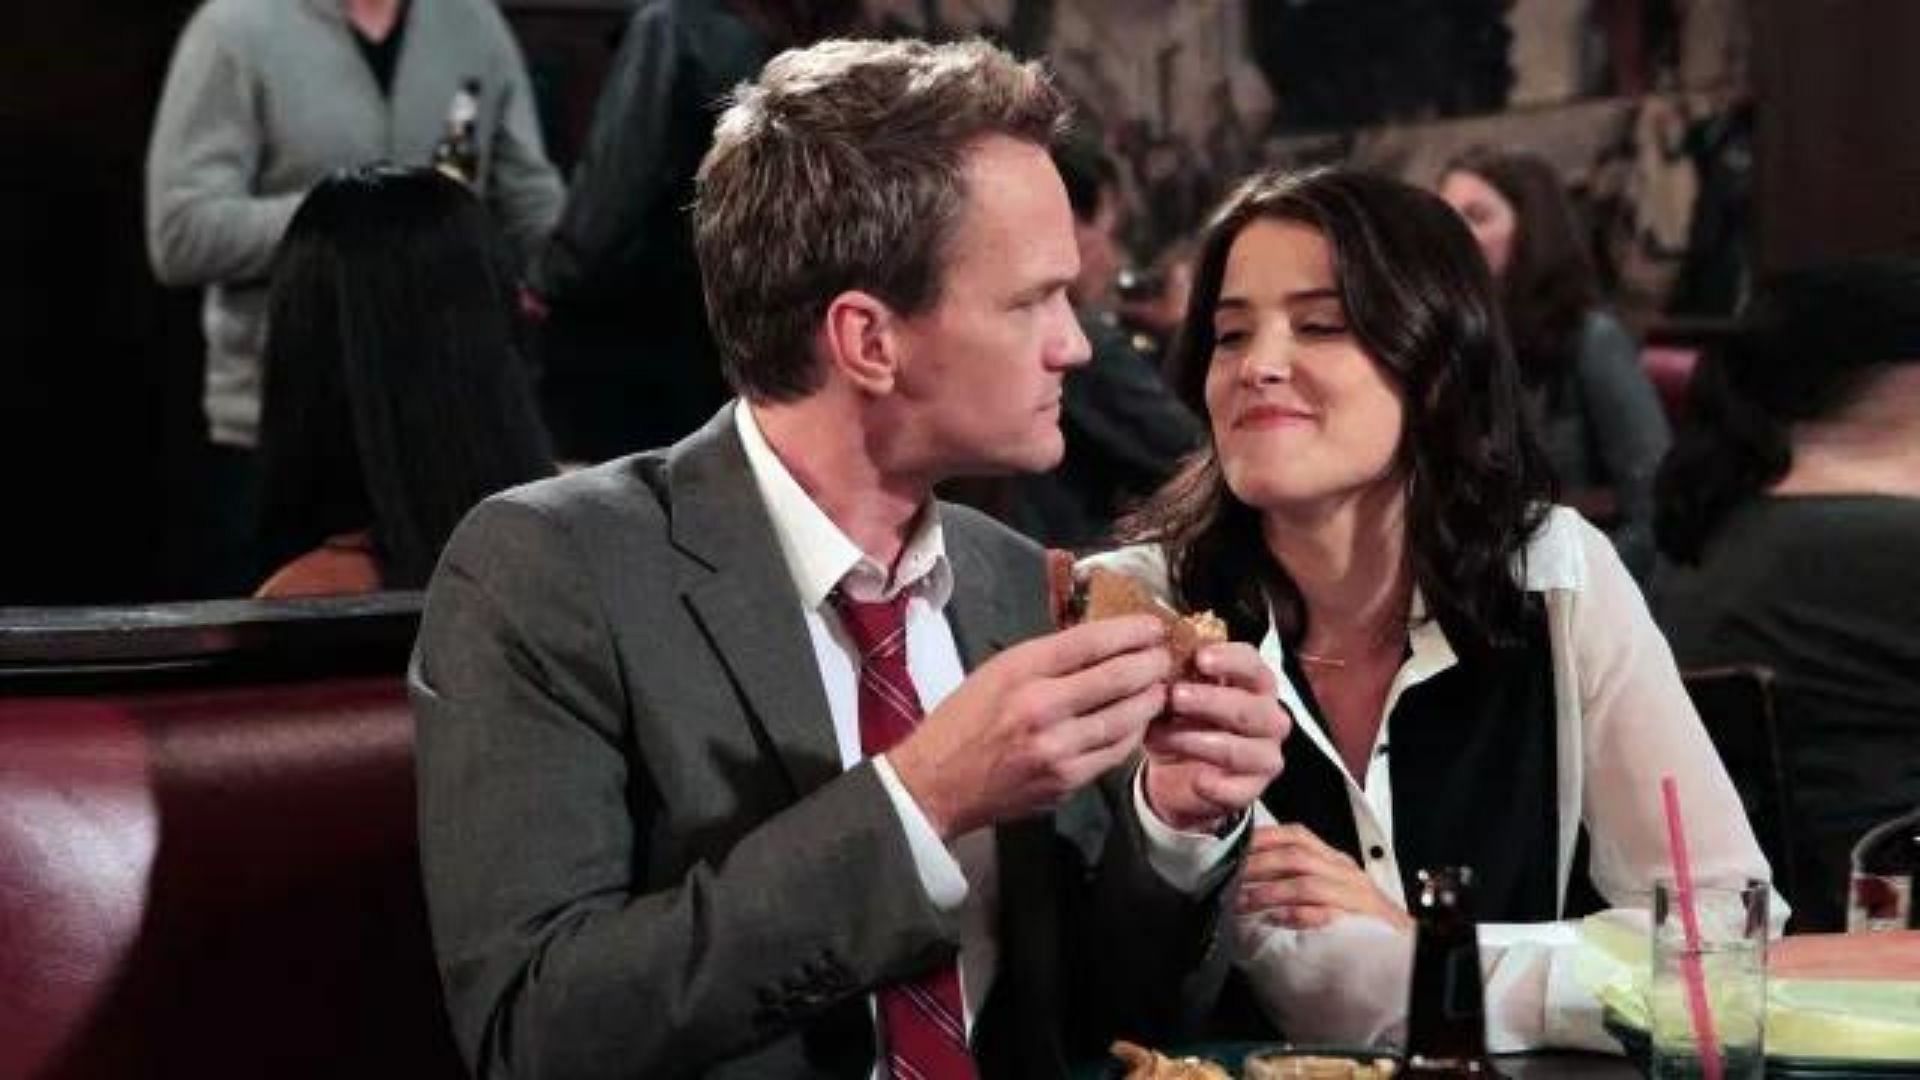 Robin And Barney From How I Met Your Mother (Image Via Disnep+Hotstar)